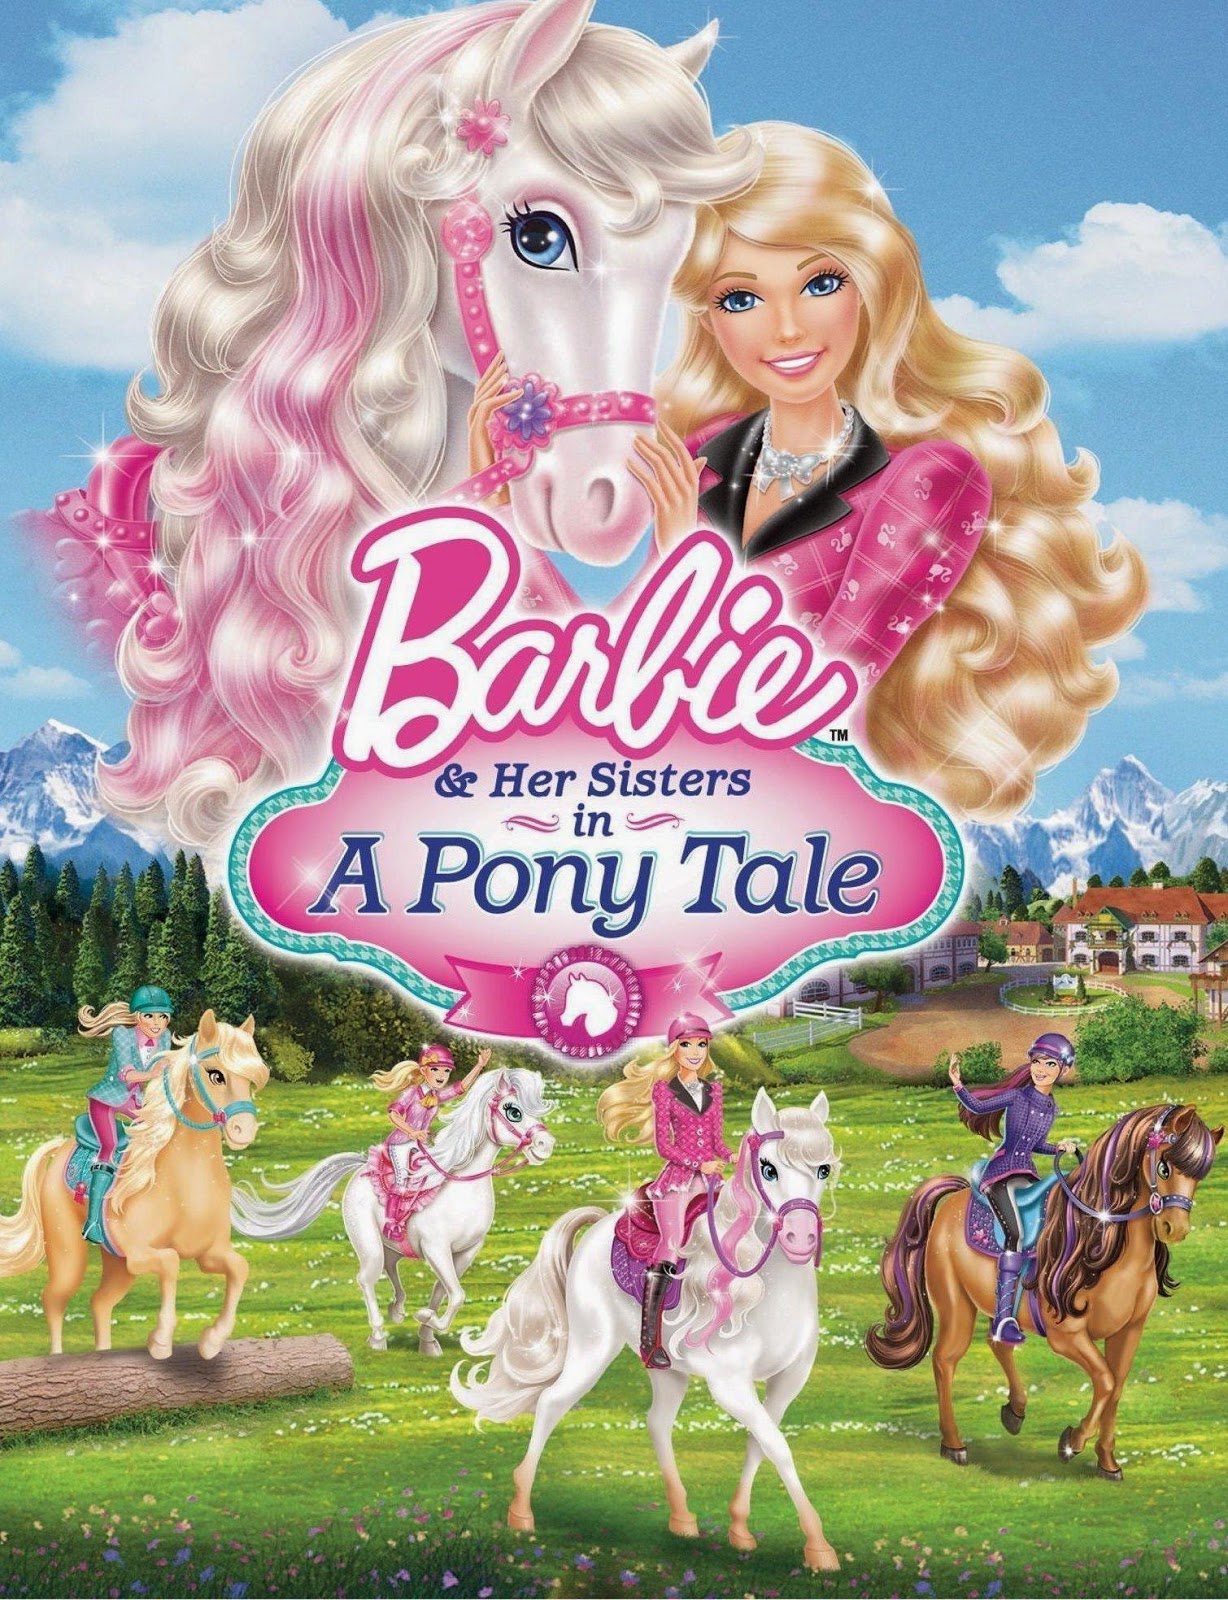 Barbie And Her Sisters in a Pony Tale (2013) Full Movie HD